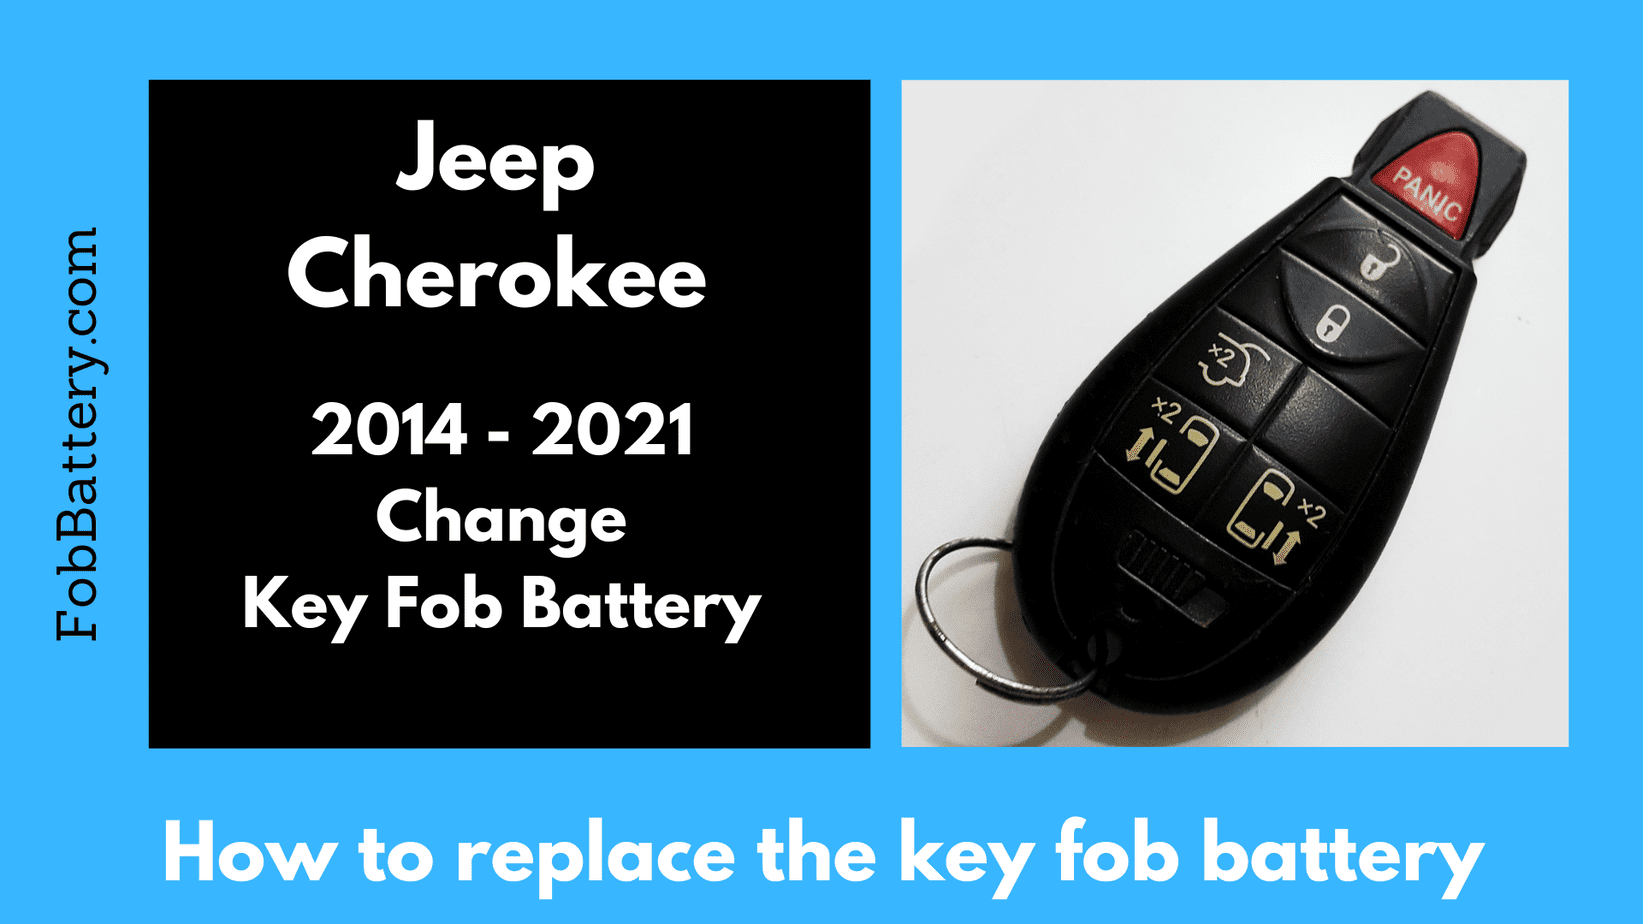 Jeep Cherokee key fob battery replacement.